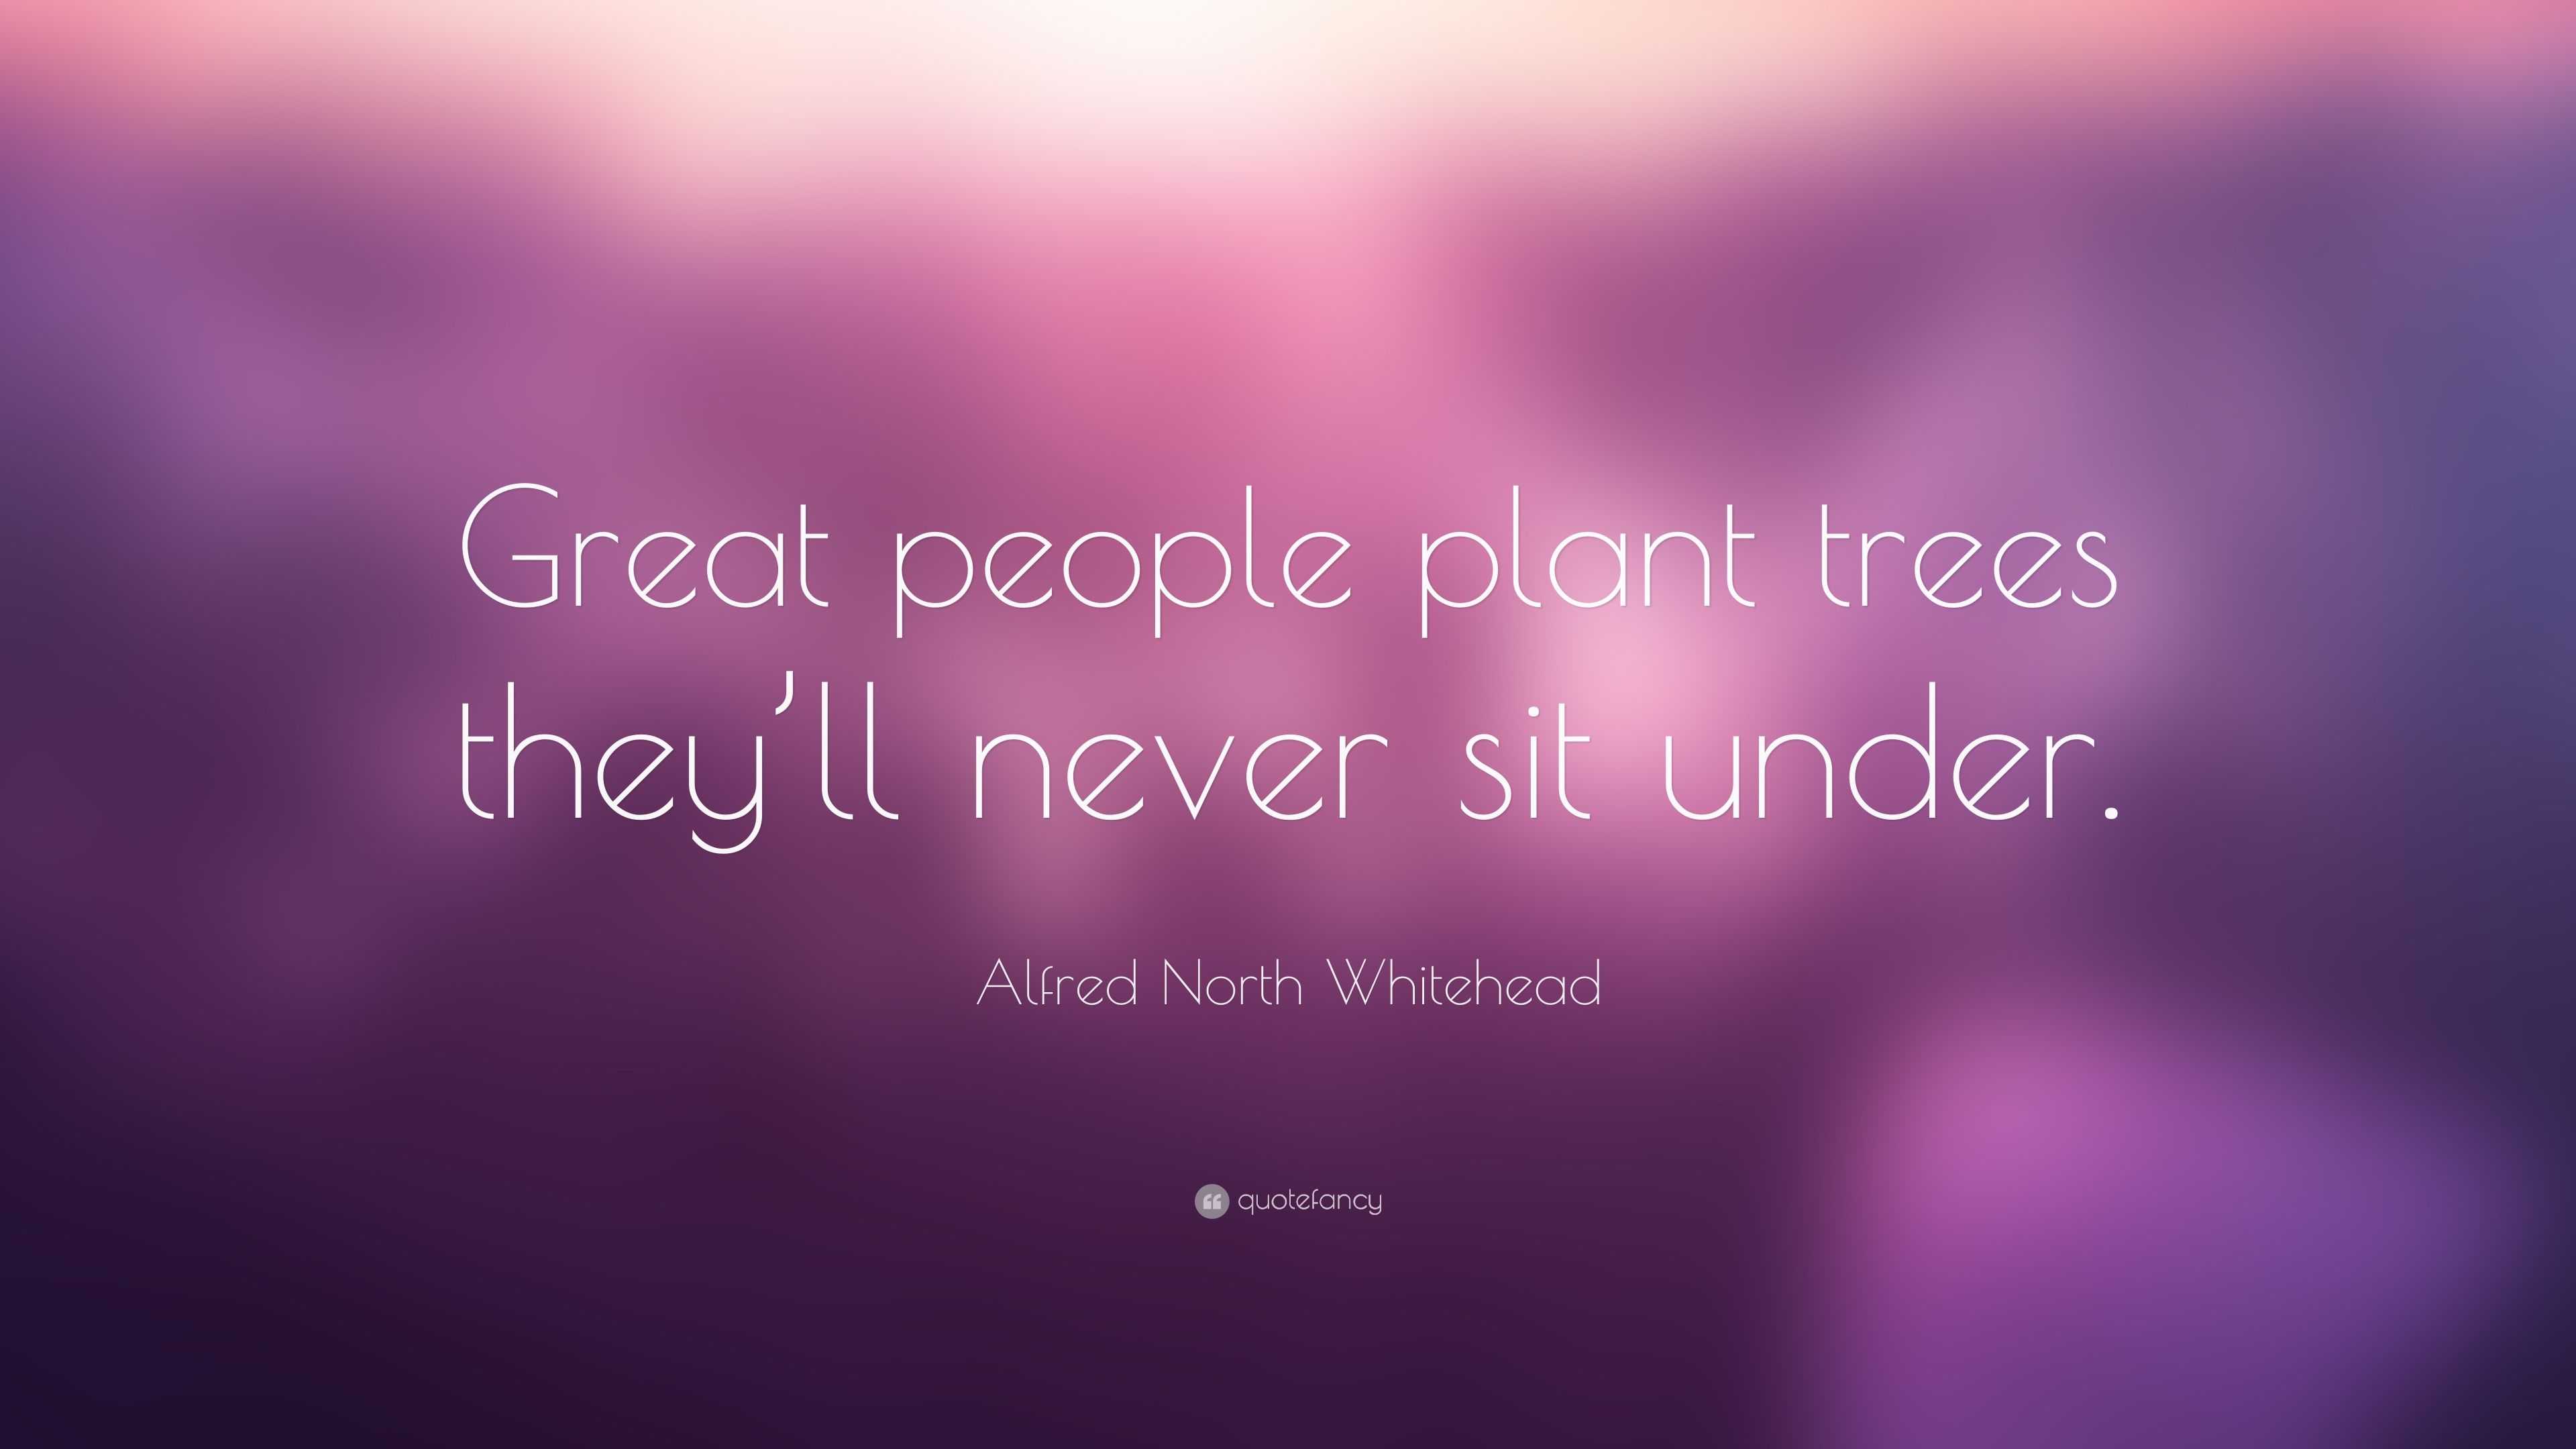 Alfred North Whitehead Quote: “Great people plant trees they’ll never